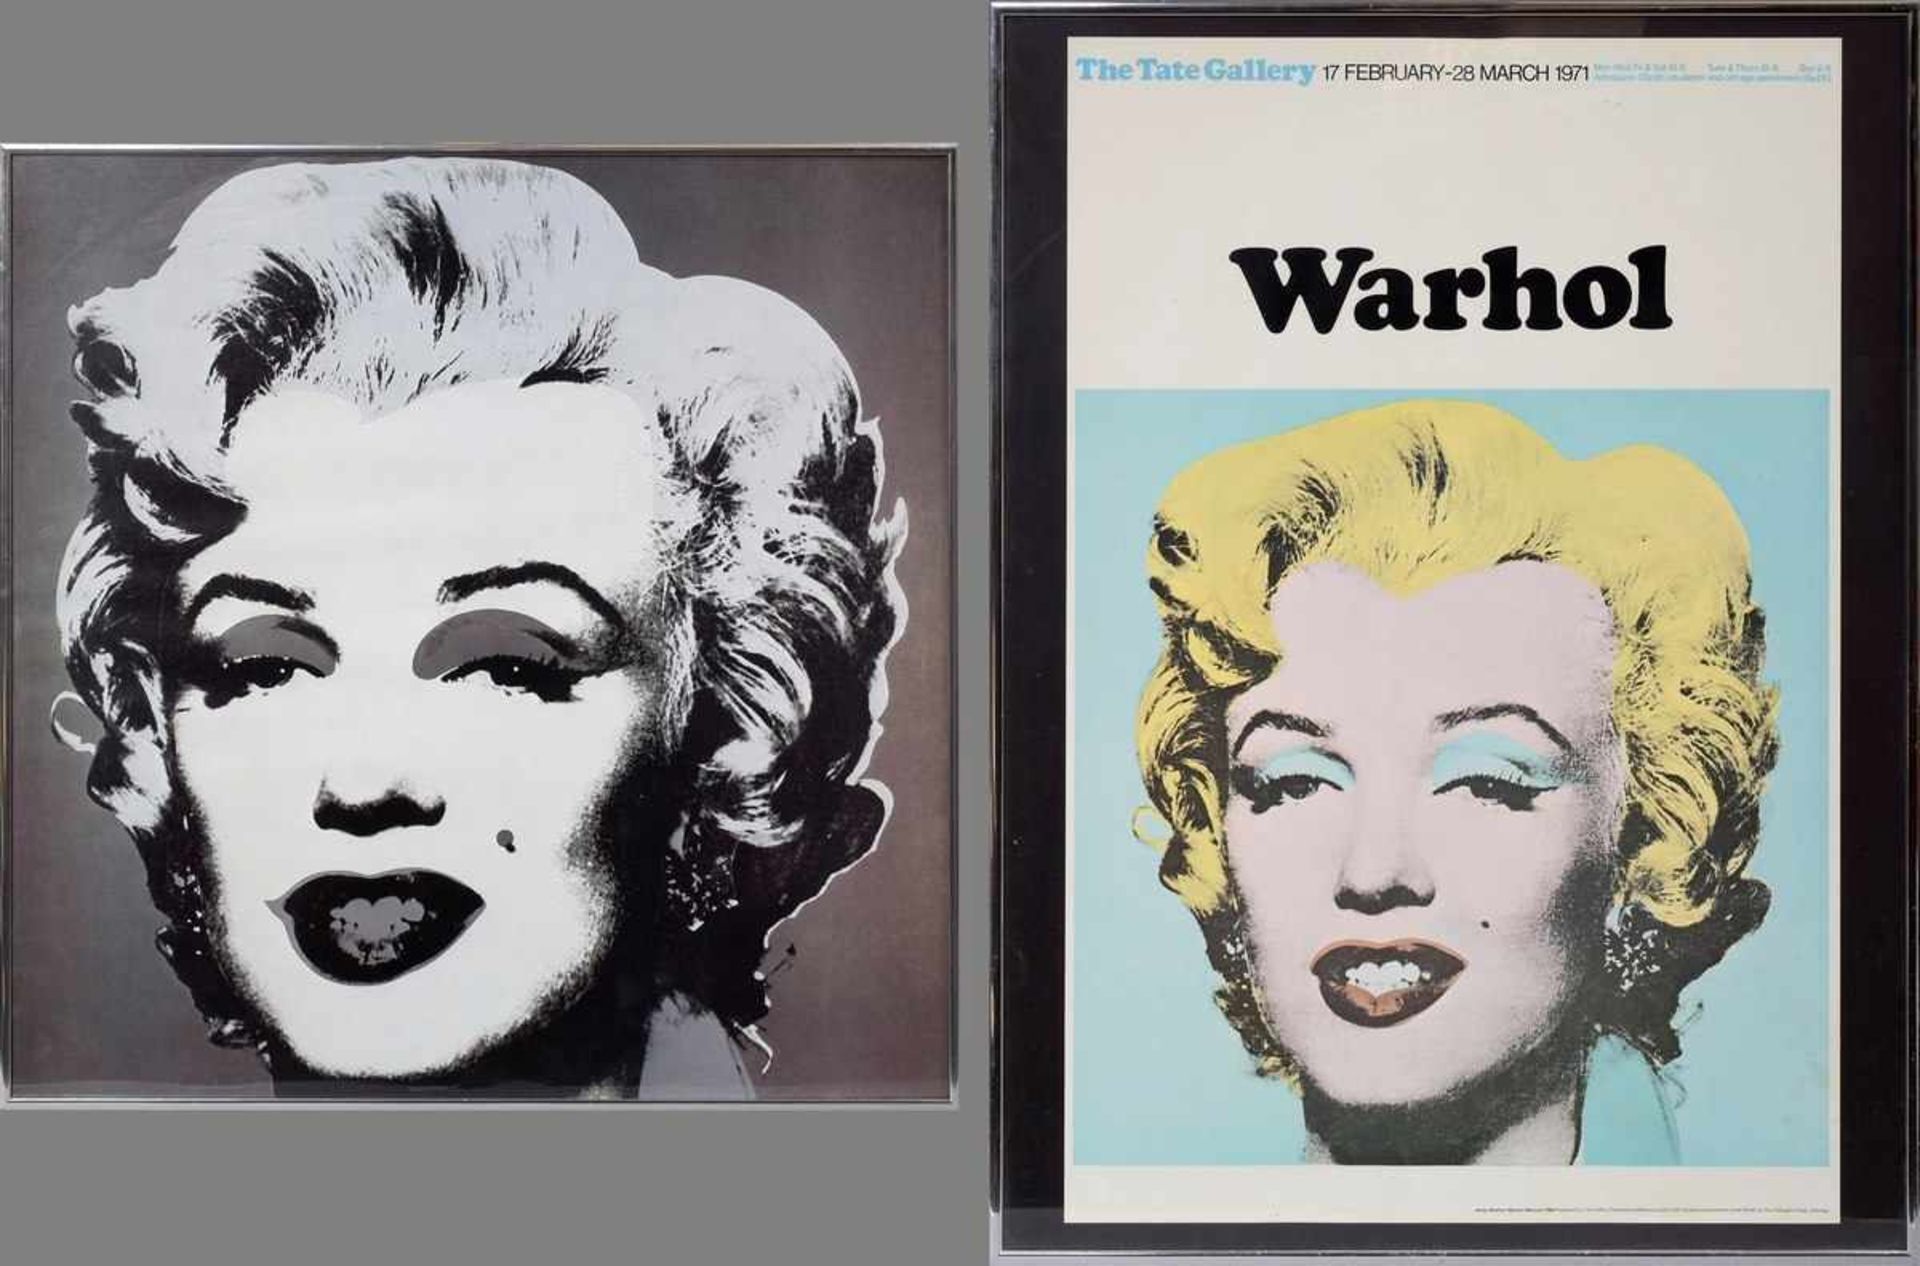 2 Diverse Warhol, Andy (1928-1987) "Turquoise Marilyn" Offsetlithographie Poster der Tate Gallery